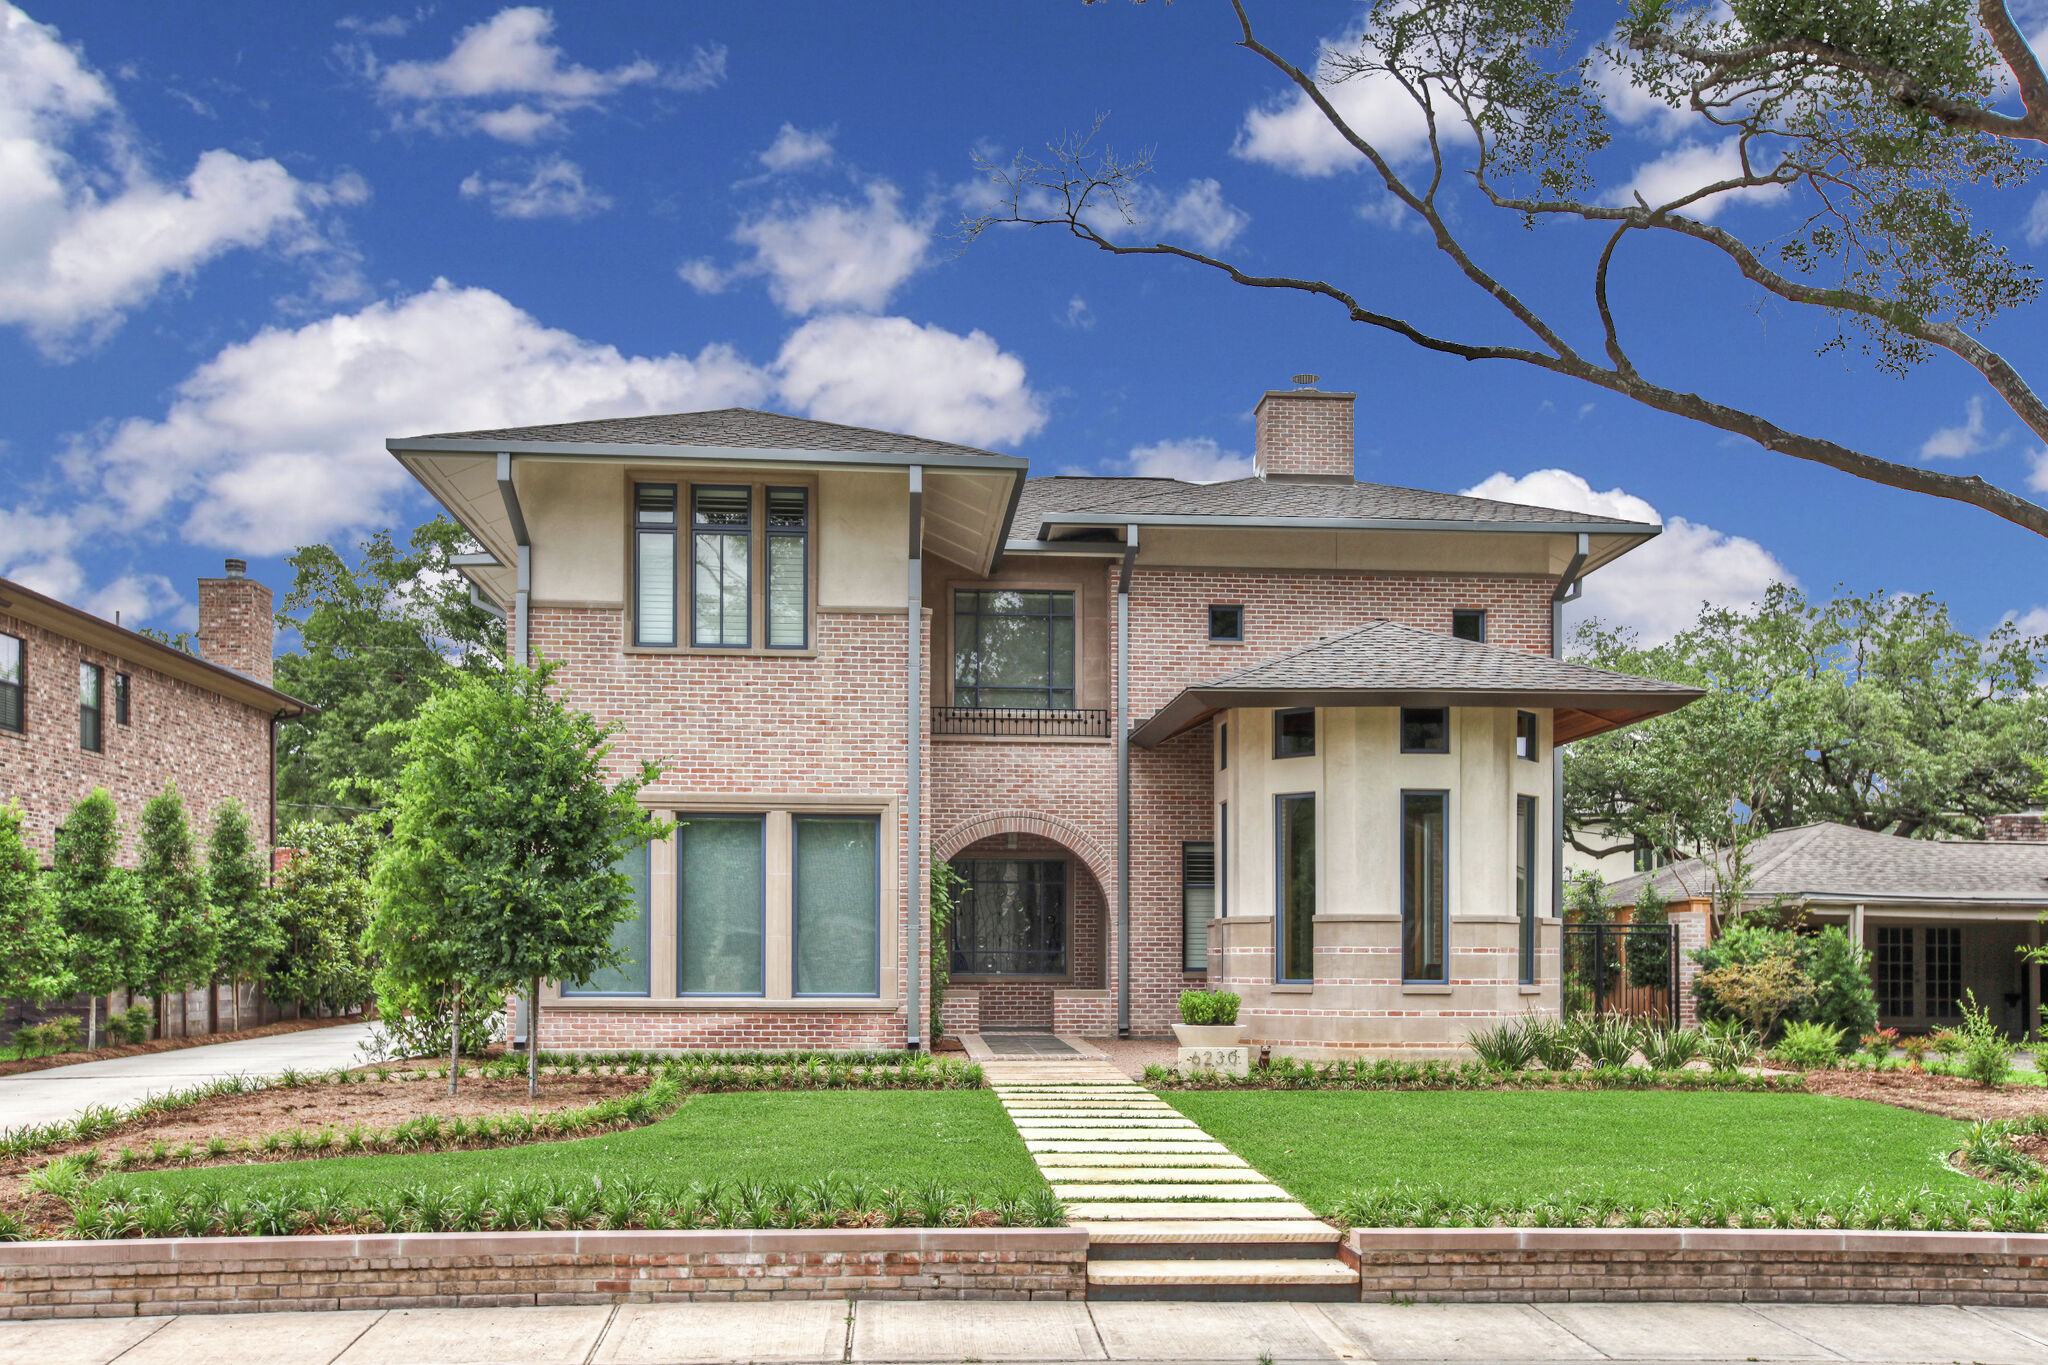 This stunning Houston home shows an architect’s imagination